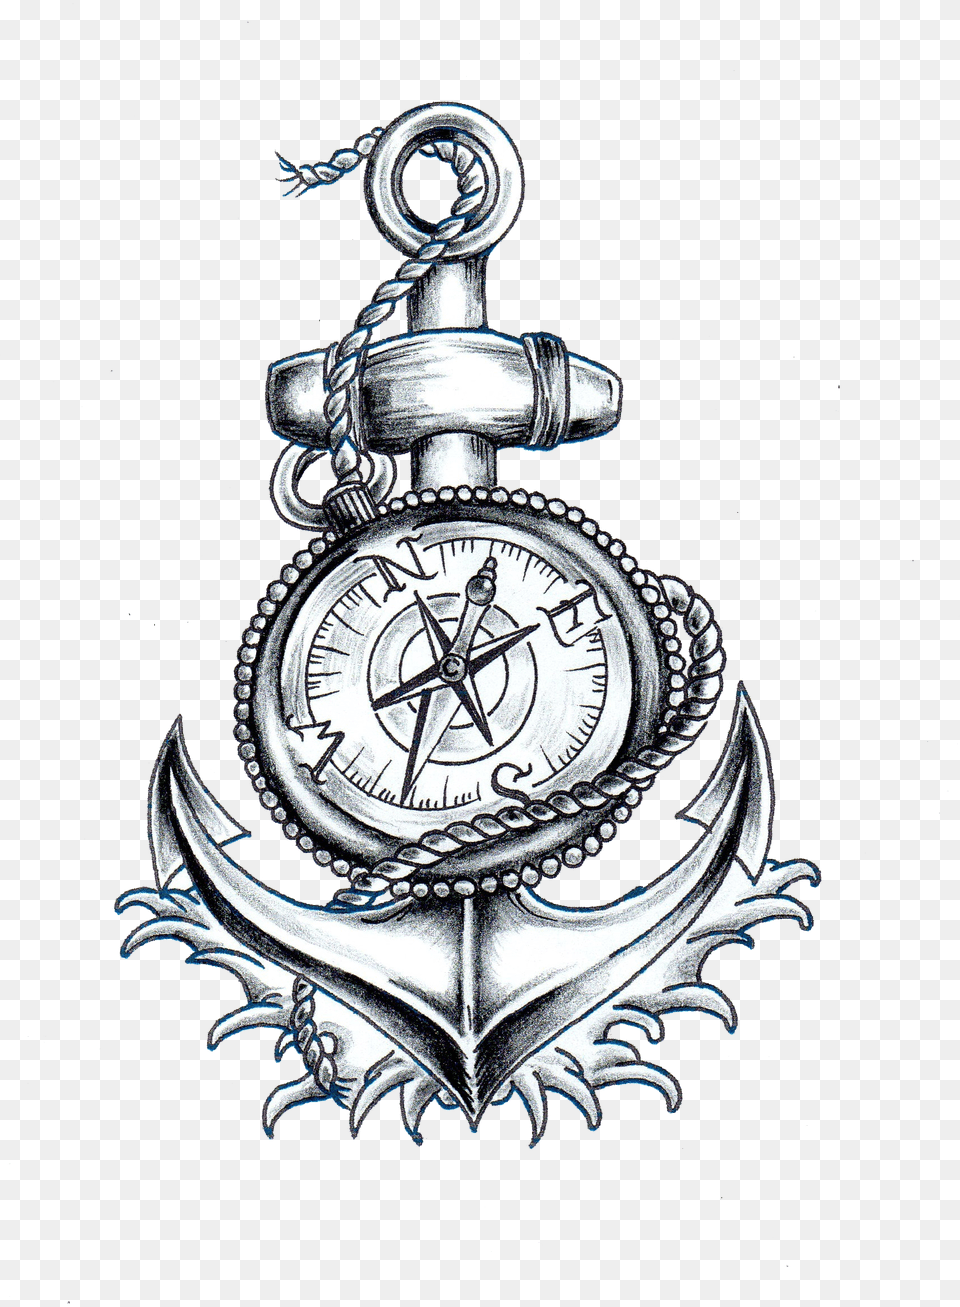 Compass Ship S Wheel Transprent Free Anchor And Compass, Logo Png